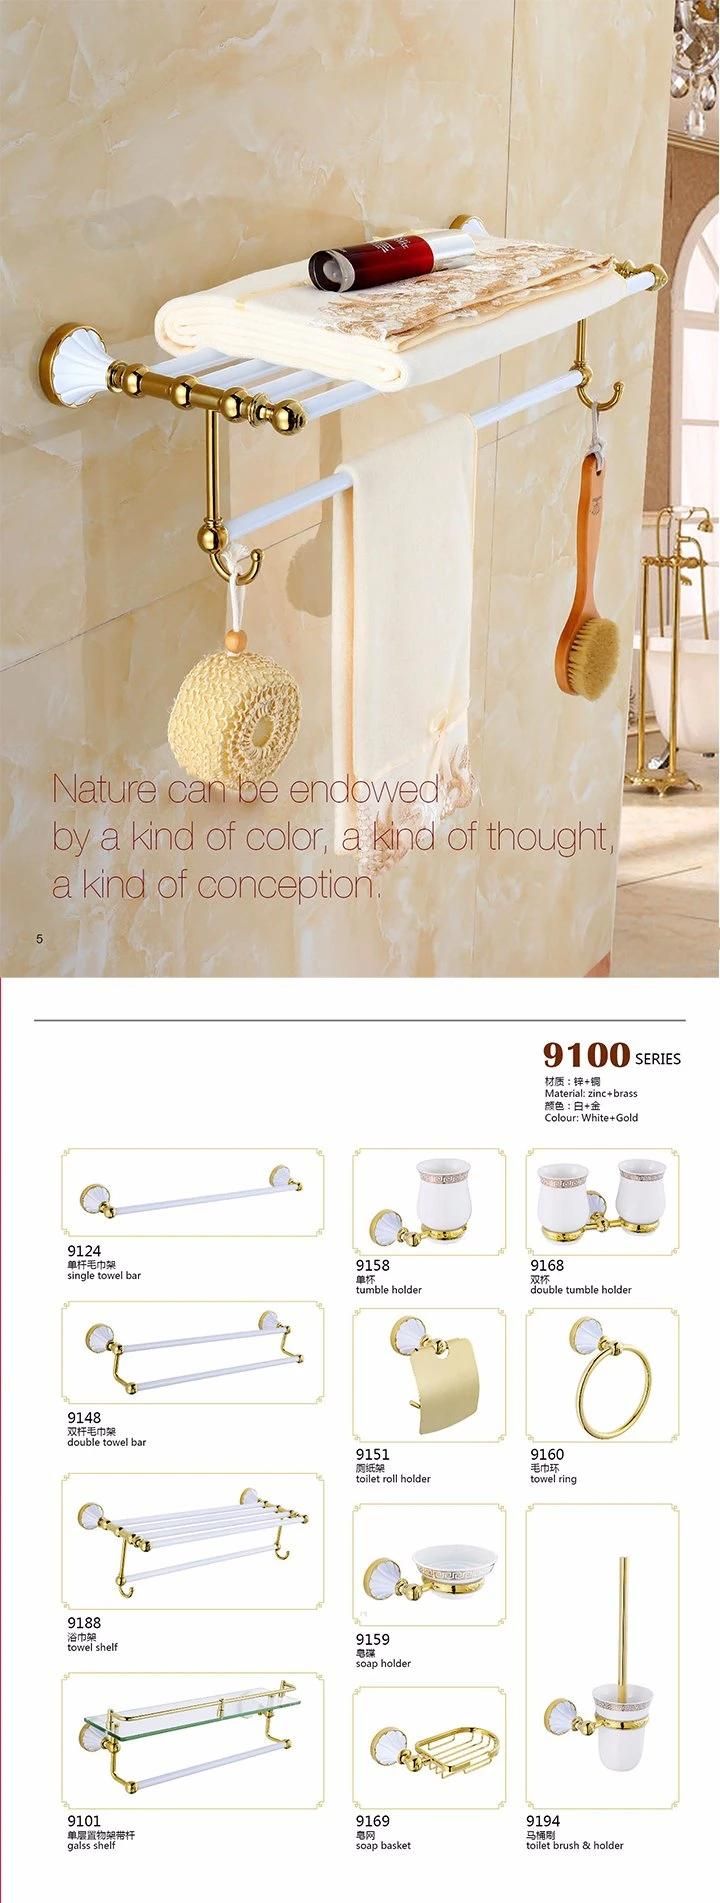 Best Price Spare Toilet Paper Roll Holder 9600 Series